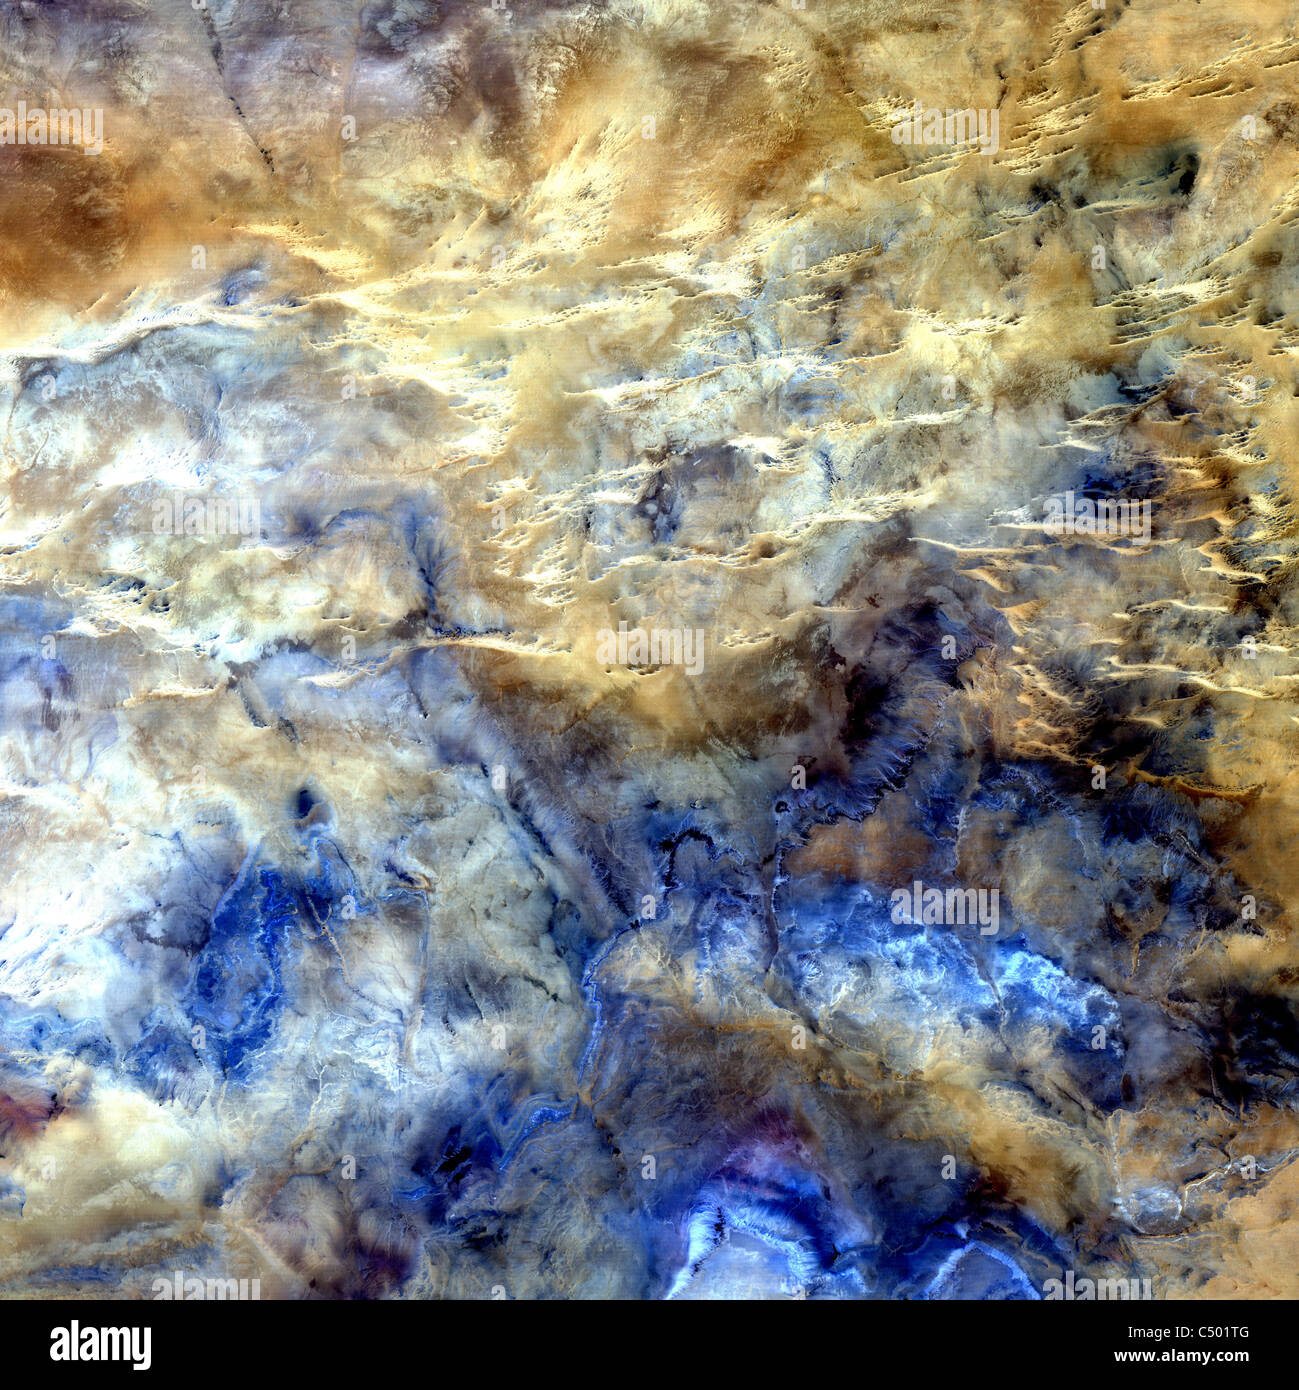 as from space in this NASA satellite image. Stock Photo